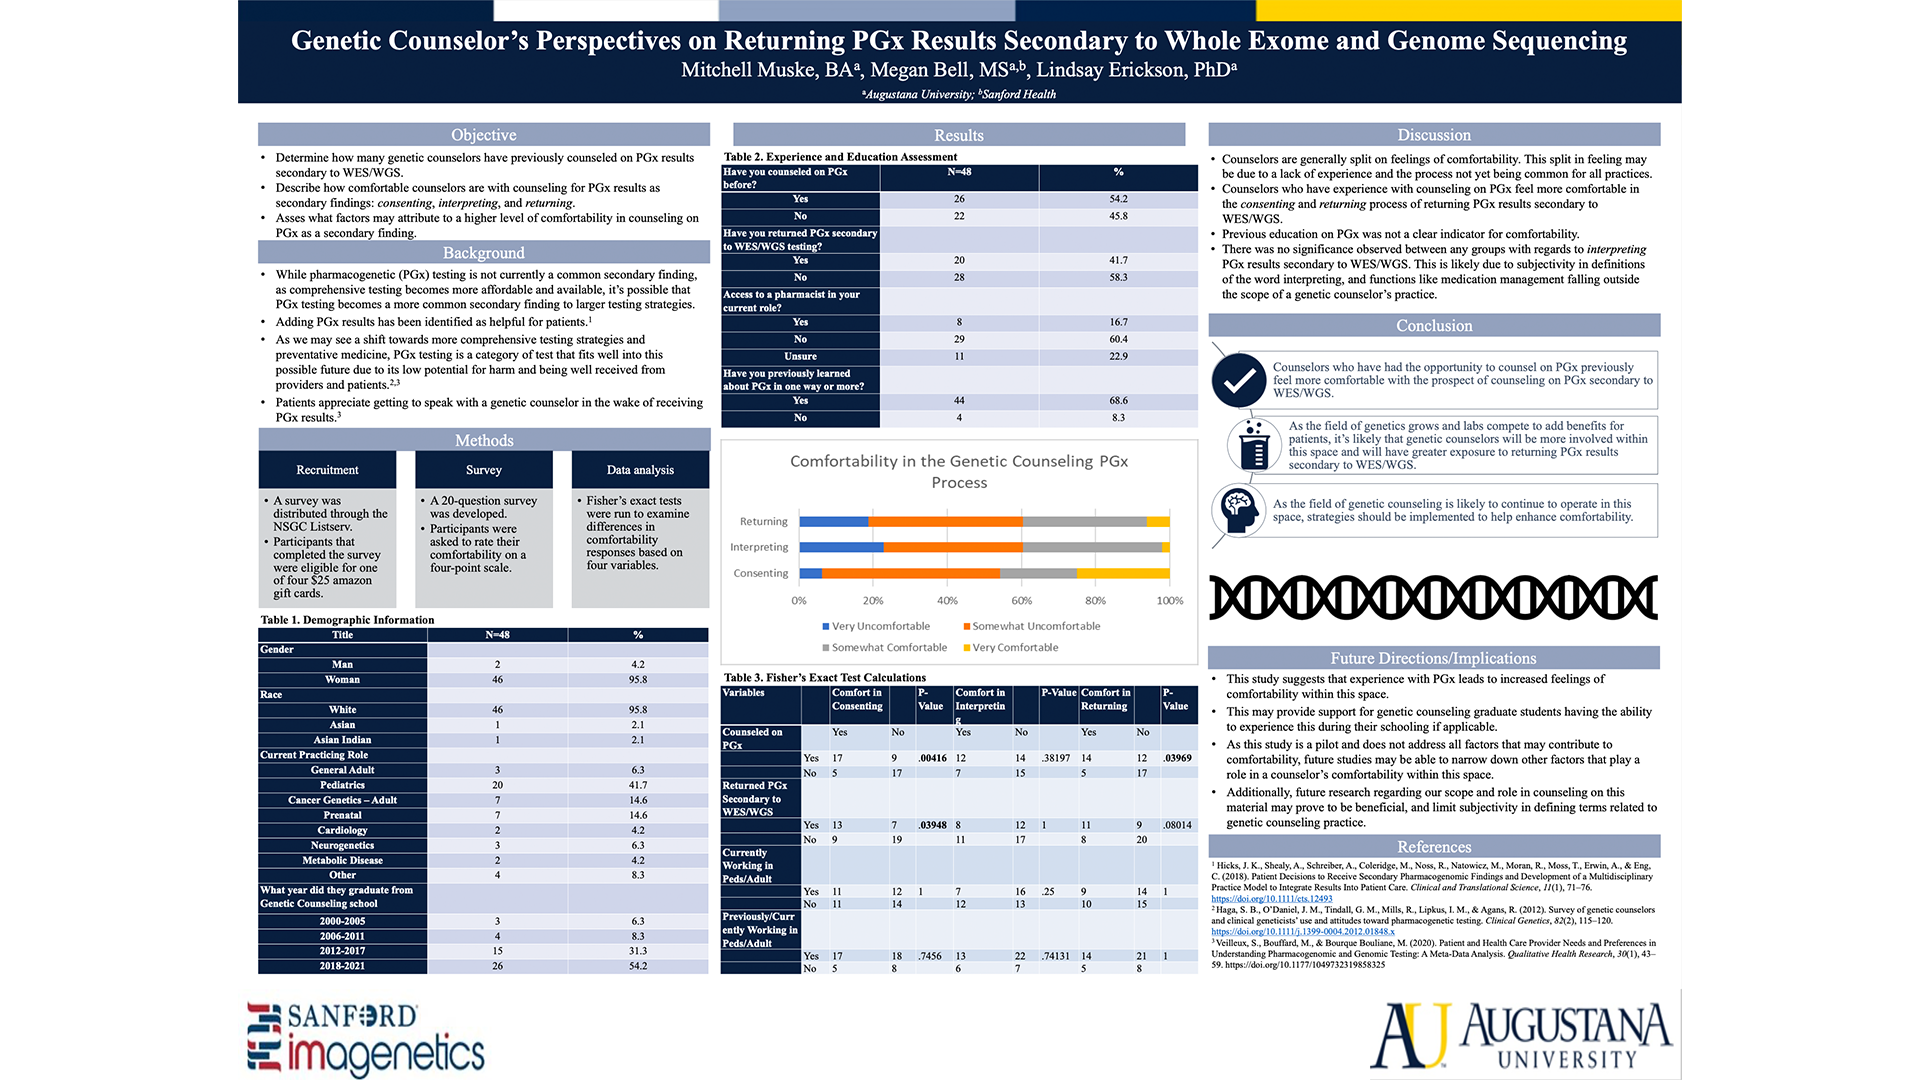 Genetic Counselor’s Perspectives on Returning PGx Results Secondary to Whole Exome and Genome Sequencing Poster